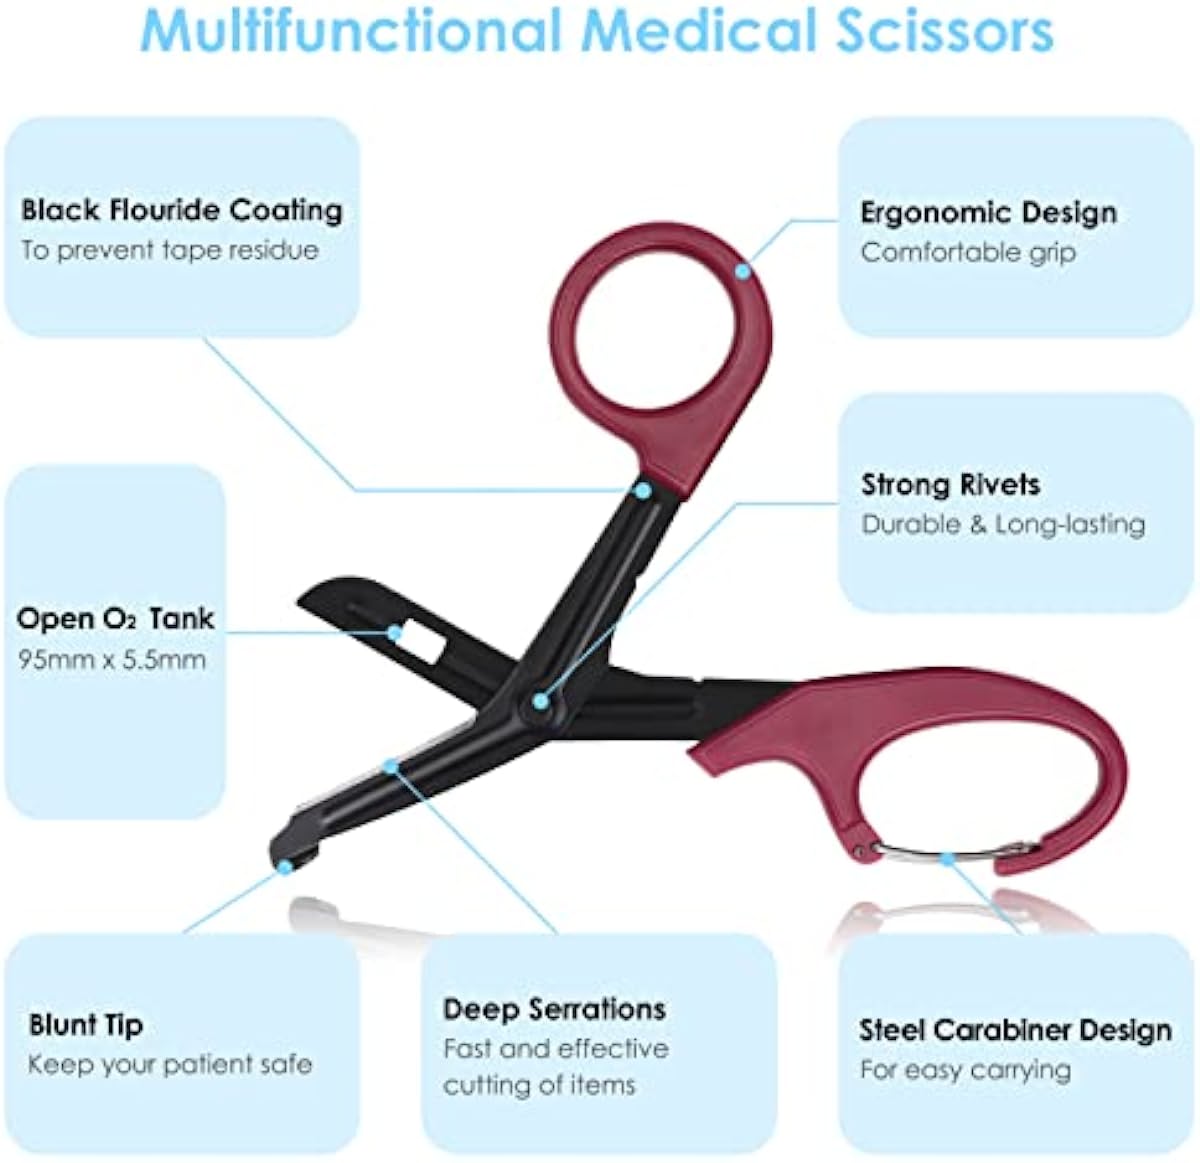 MOVOCA 2 Packs Medical Scissors with Carabiner - 7.5\" Bandage Scissors Trauma Shears, Fluoride Coated Non-stick Blades Stainless Steel Surgical Scissors for Doctor, Nurses, Nursing Students, EMT, EMS